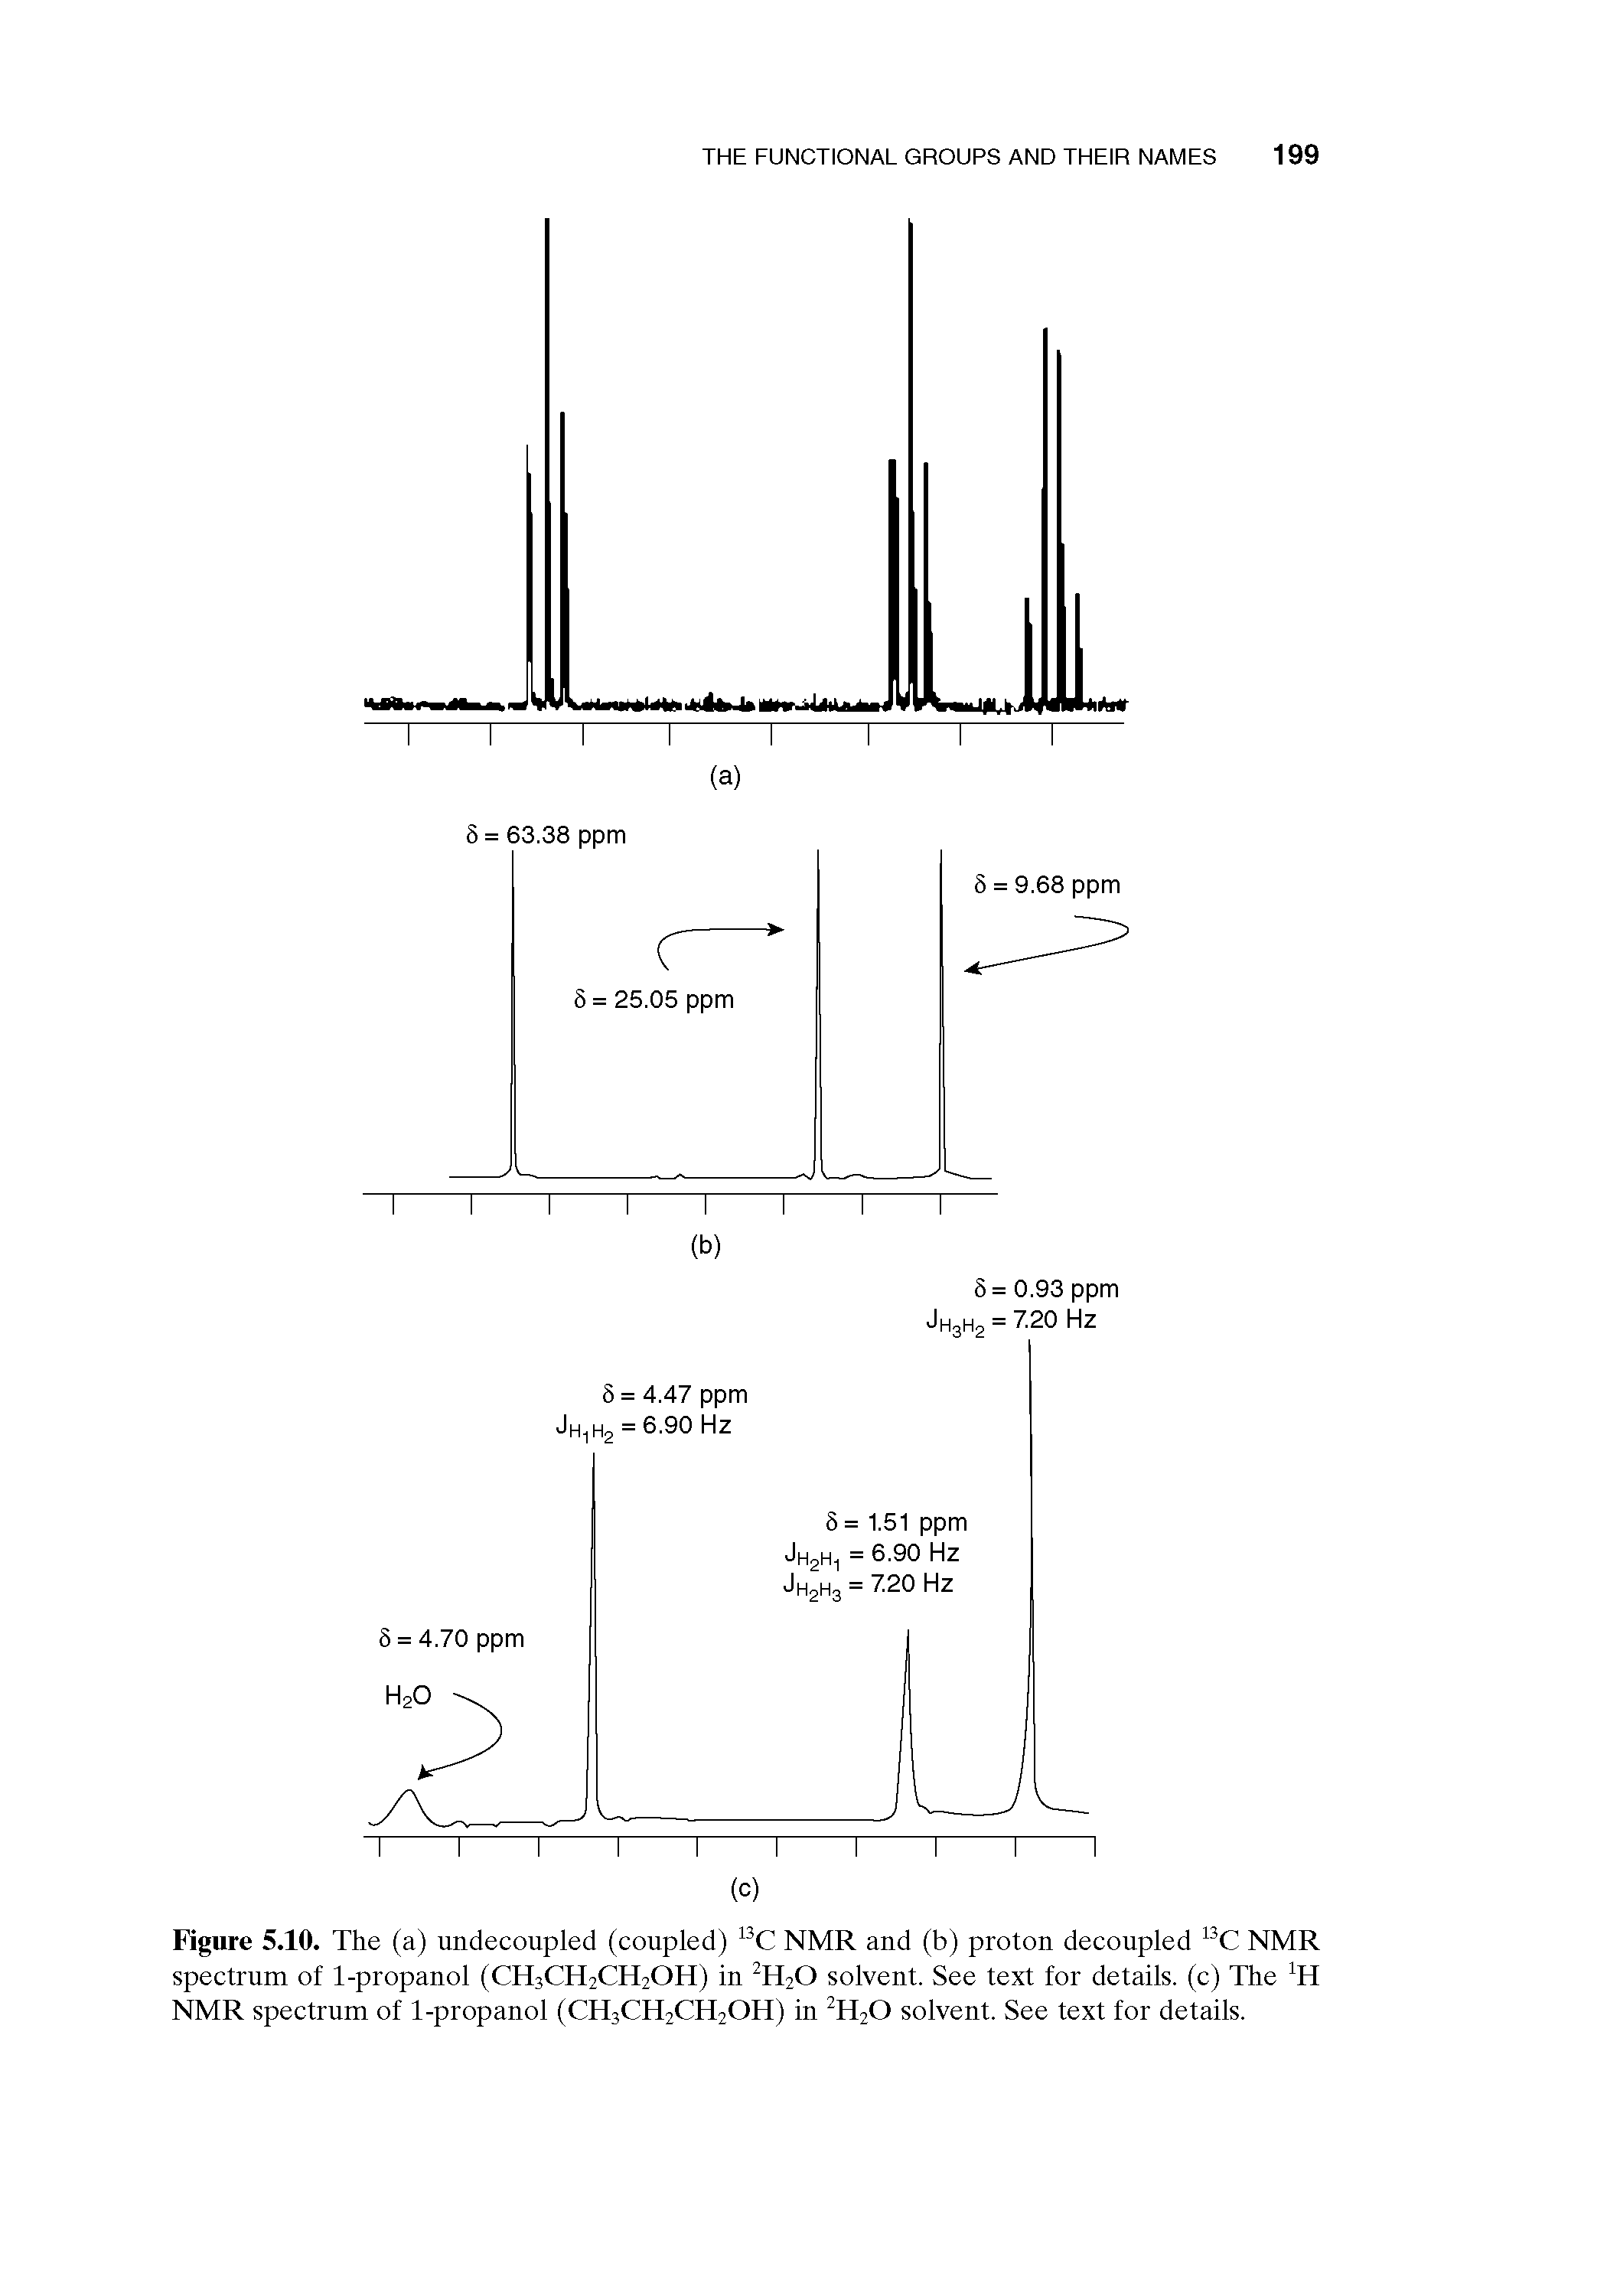 Figure 5.10. The (a) undecoupled (coupled) C NMR and (b) proton decoupled C NMR spectrum of 1-propanol (CH3CH2CH2OH) in H20 solvent. See text for details, (c) The NMR spectrum of 1-propanol (CH3CH2CH2OH) in H20 solvent. See text for details.